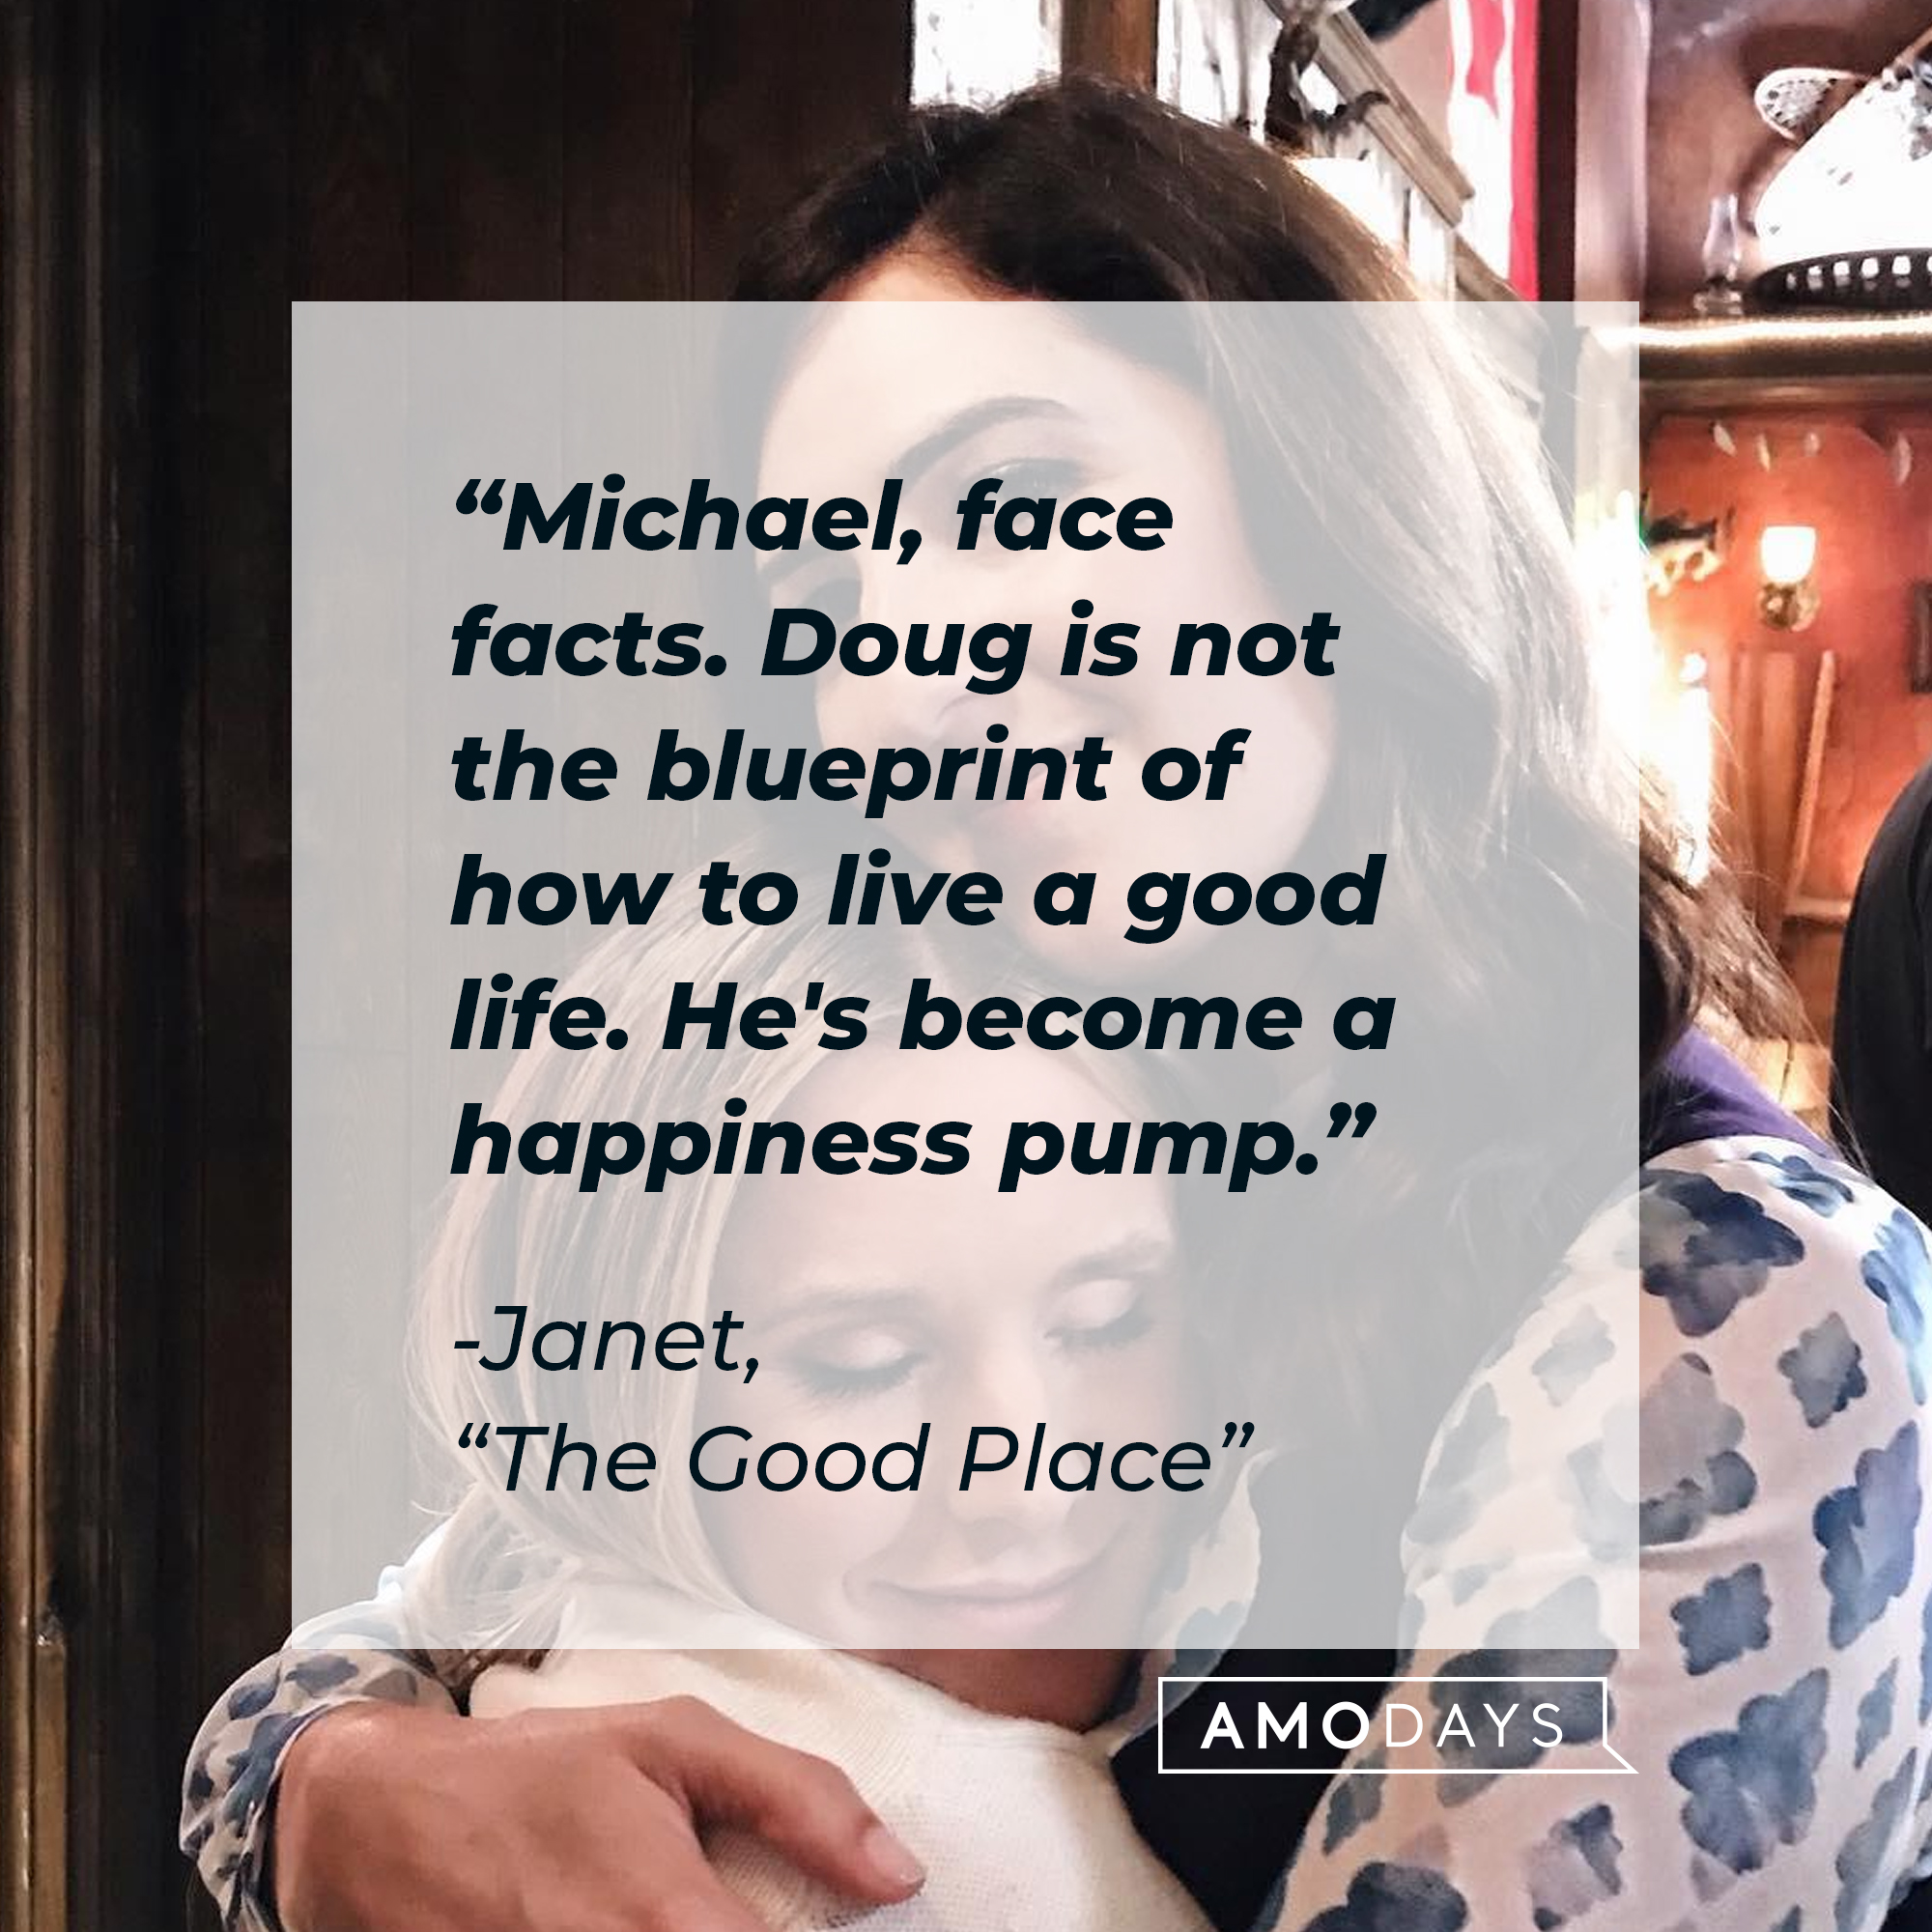 Janet's quote: "Michael, face facts. Doug is not the blueprint of how to live a good life. He's become a happiness pump." | Source: facebook.com/NBCTheGoodPlace